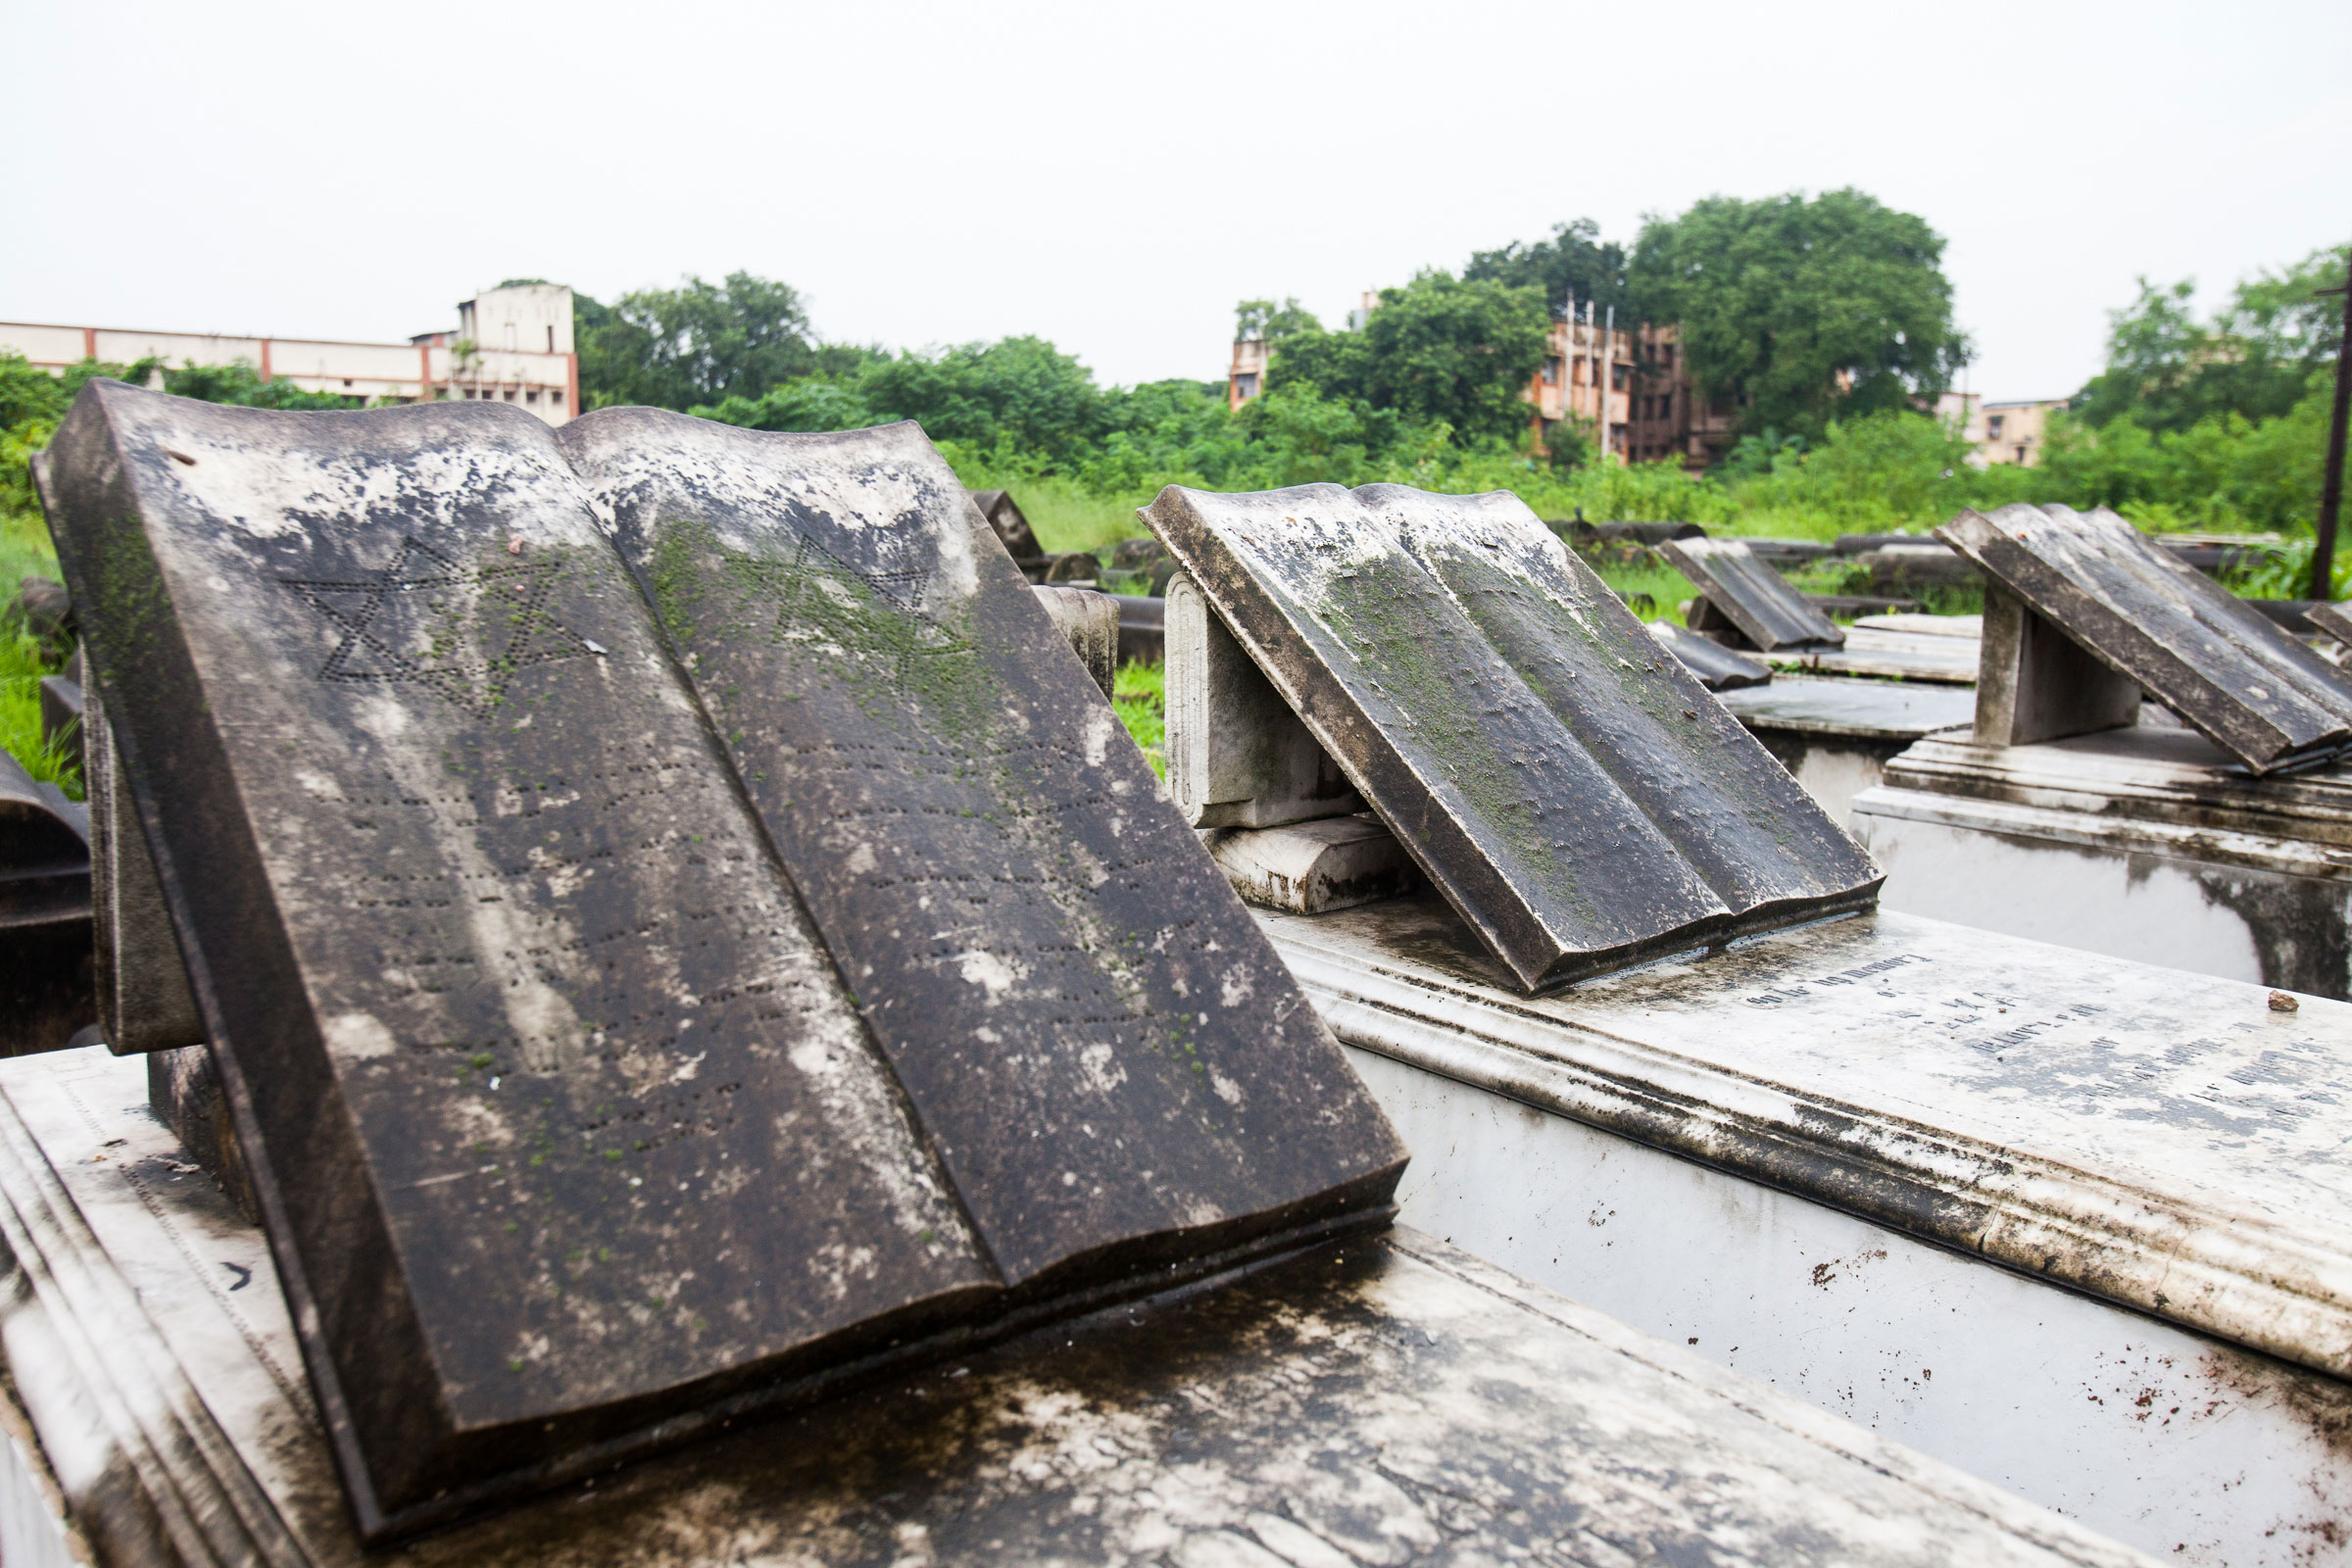 The Jewish cemetery in Calcutta is over 150 years old and consists of about 2,000 Jewish tombs along with those of Russians and Polish Jews. Usually the more elaborate and rectangular graves are those of Ashkenazy Jews. That could represent a prayer book and some have flower motifs. Bagdadi graves are rounded and have no decorative features.